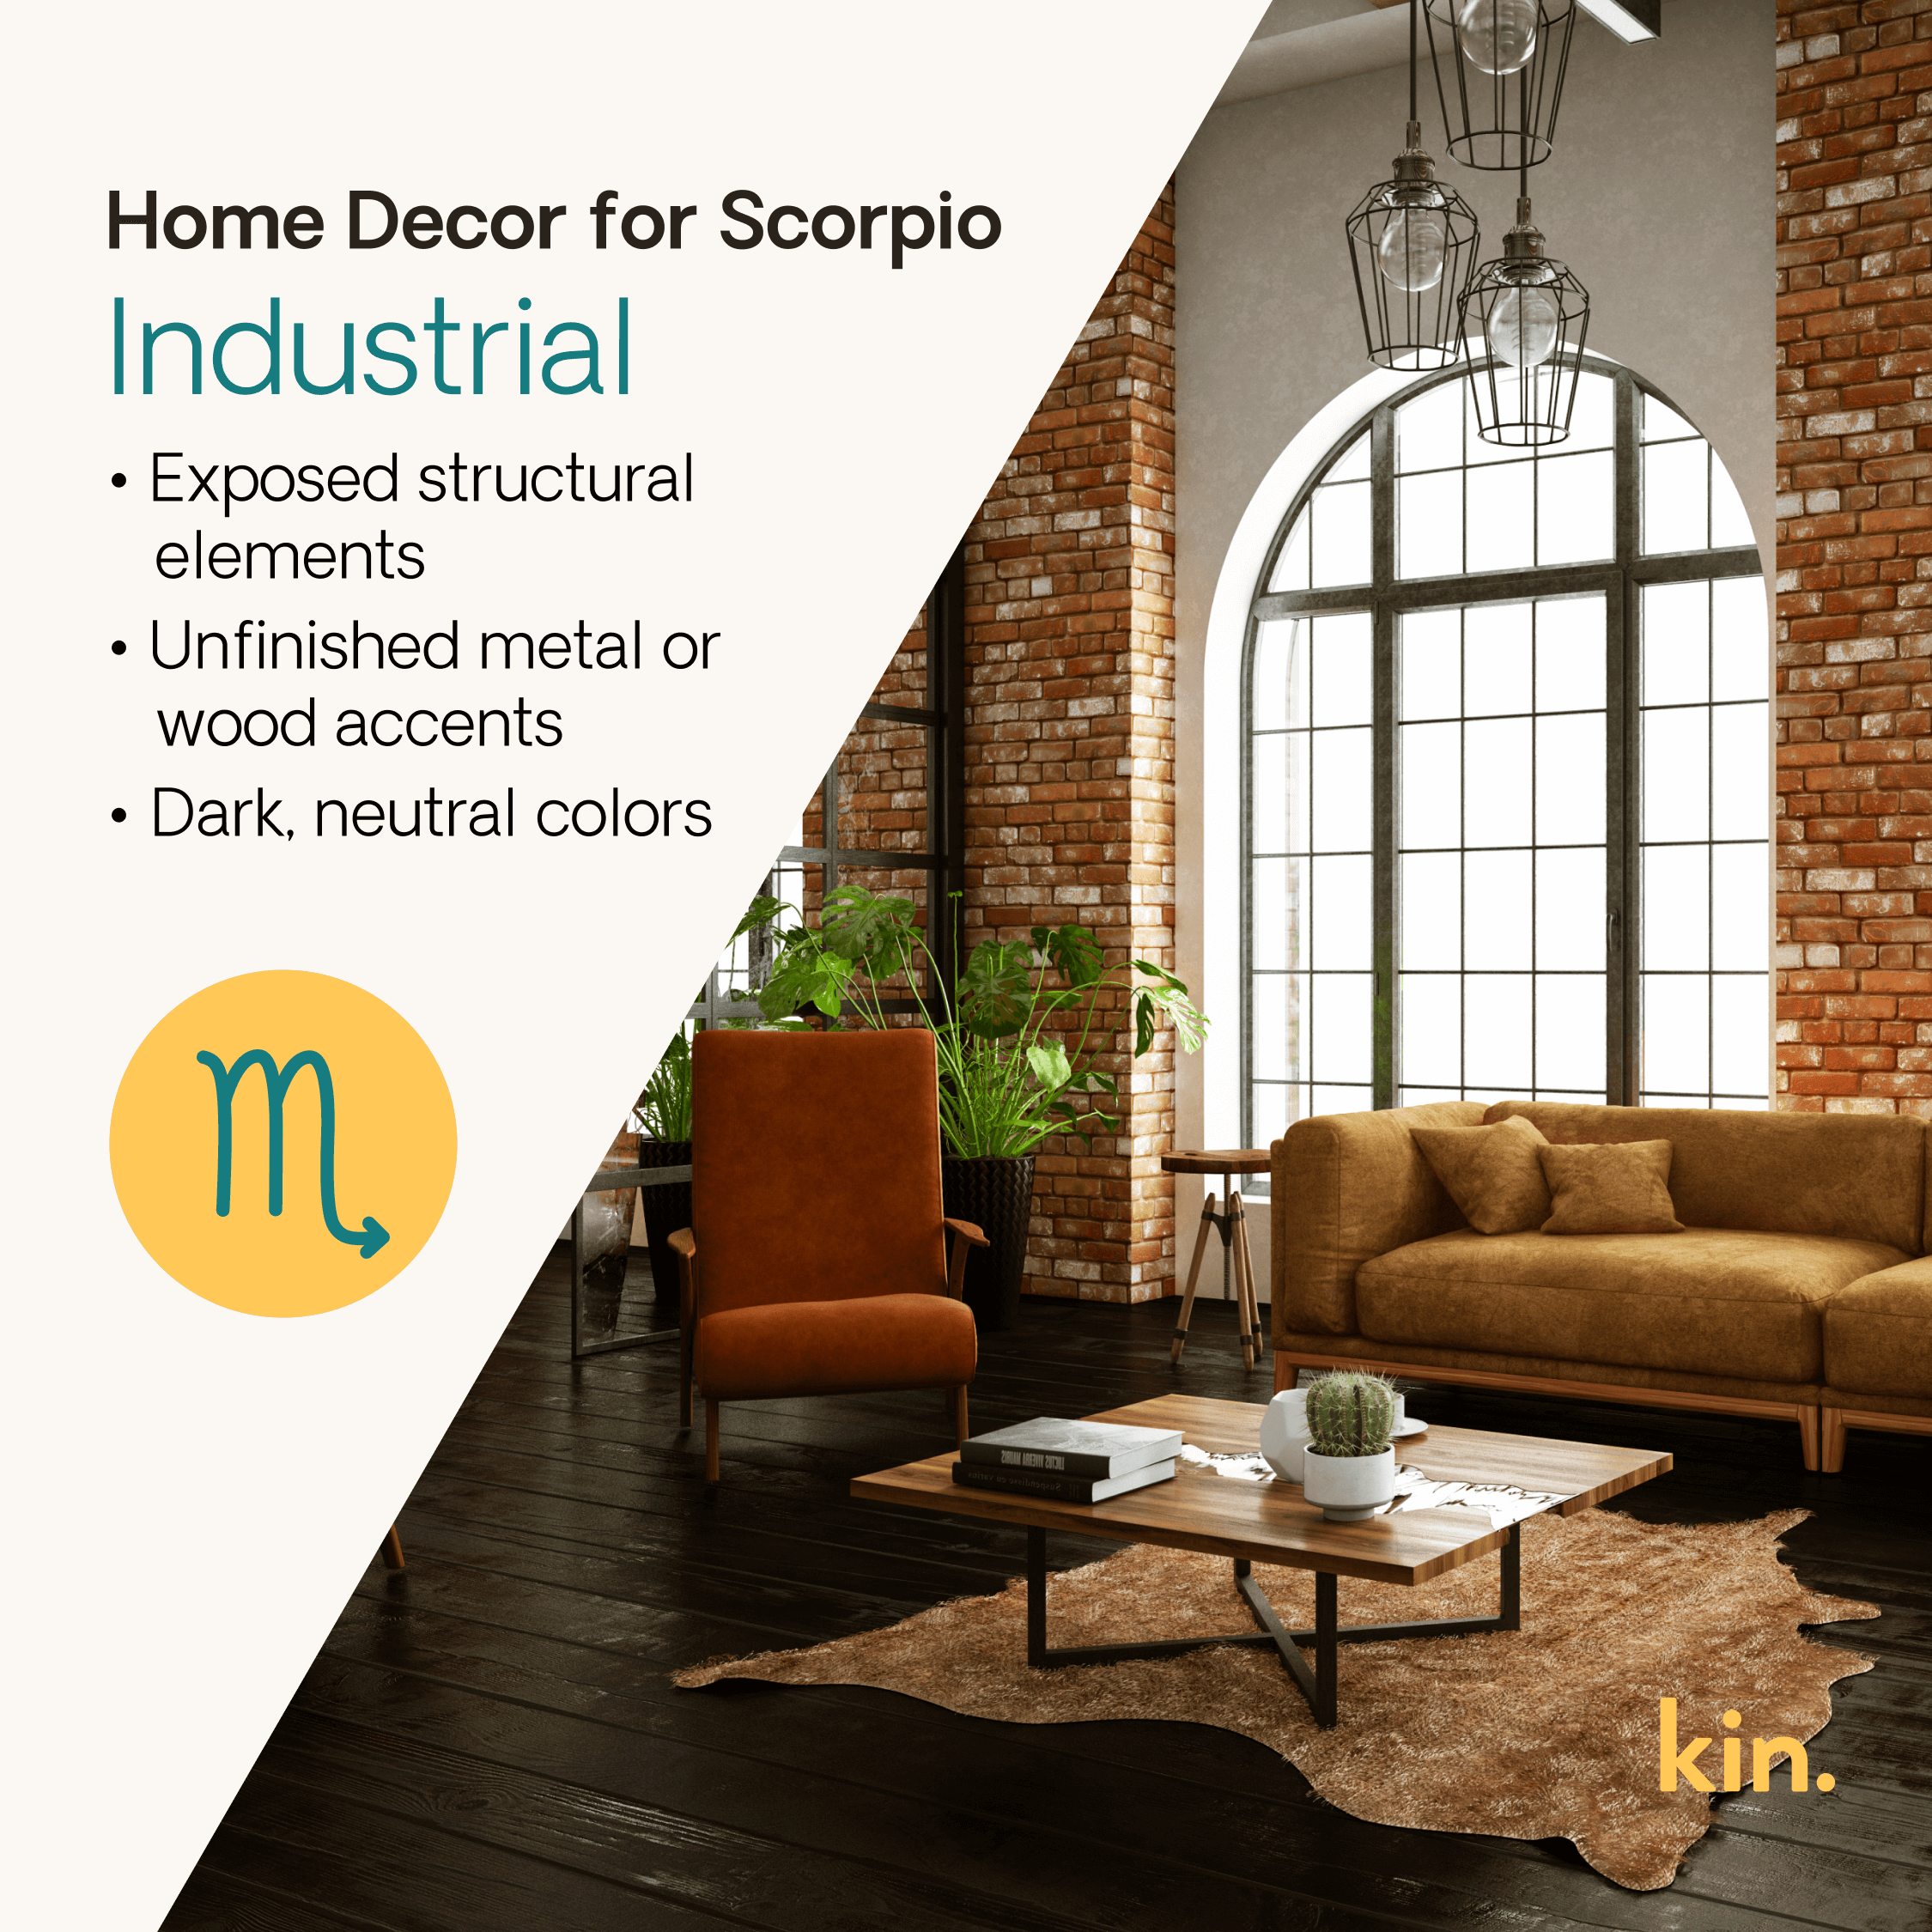 Home Decor for Scorpio: Industrial Exposed structural elements Unfinished metal or wood accents Dark, neutral colors